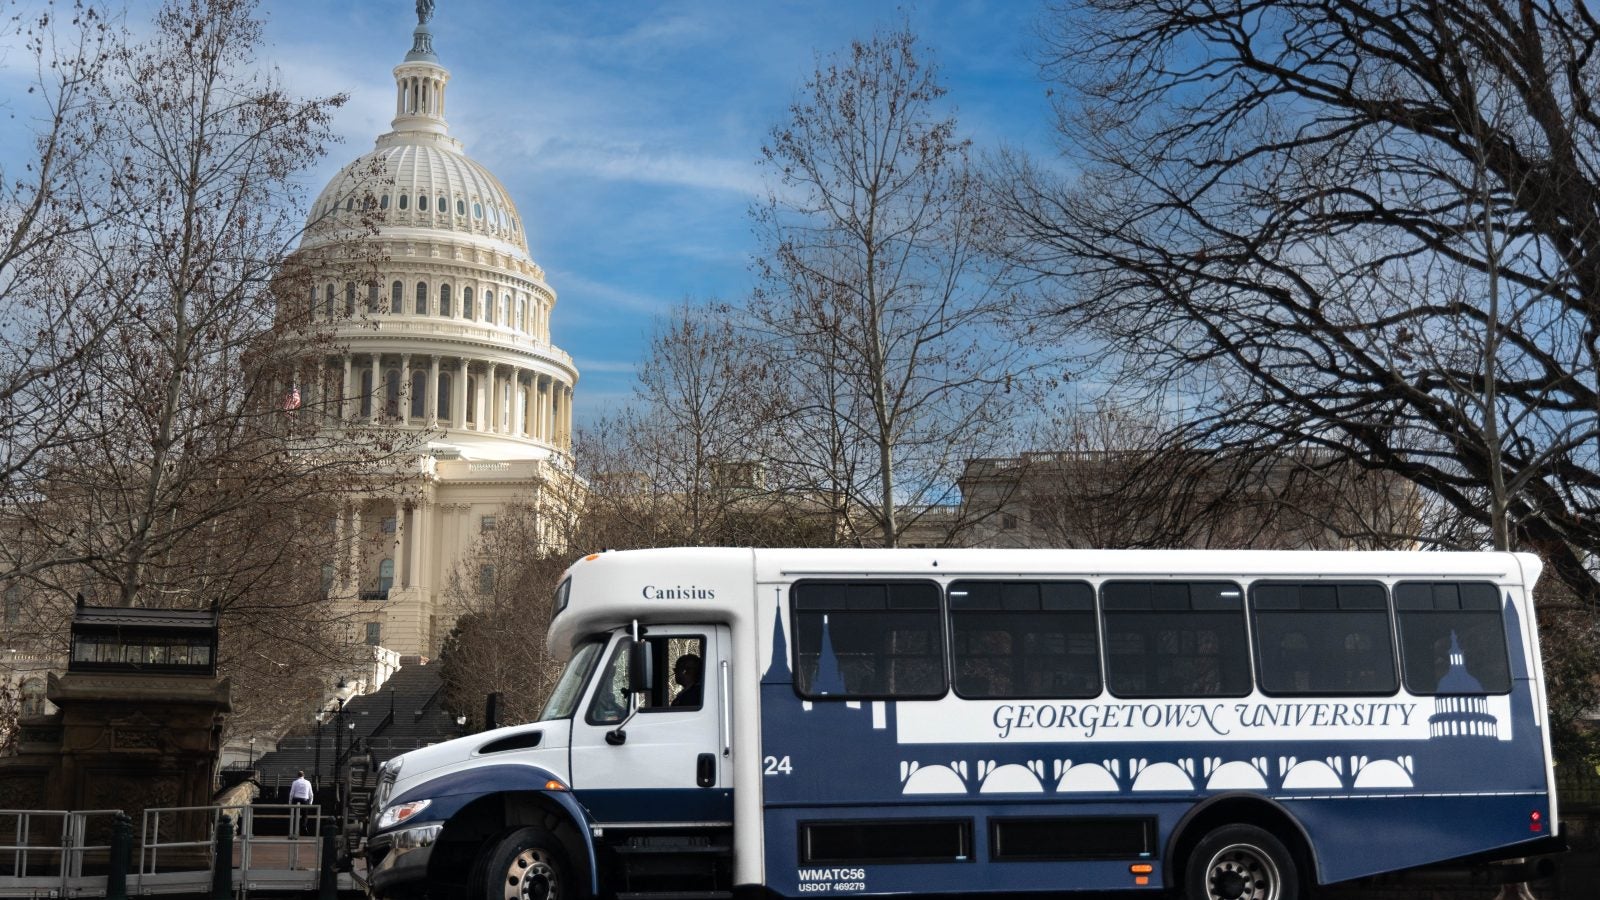 Georgetown bus parked in front of Capitol Building